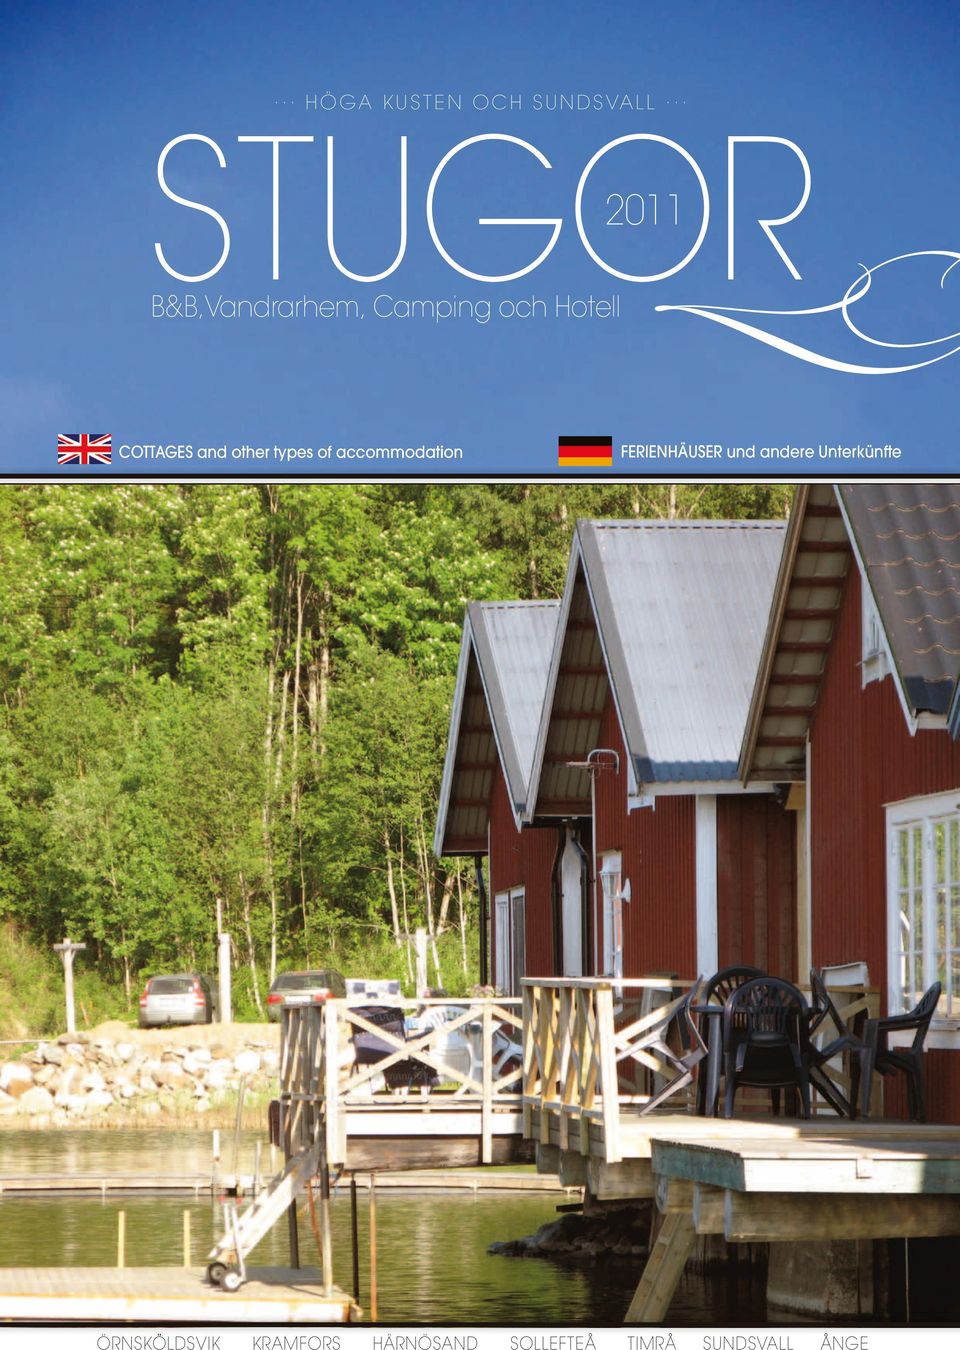 COTTAGES and other types of accommodation FERIENHÄUSER